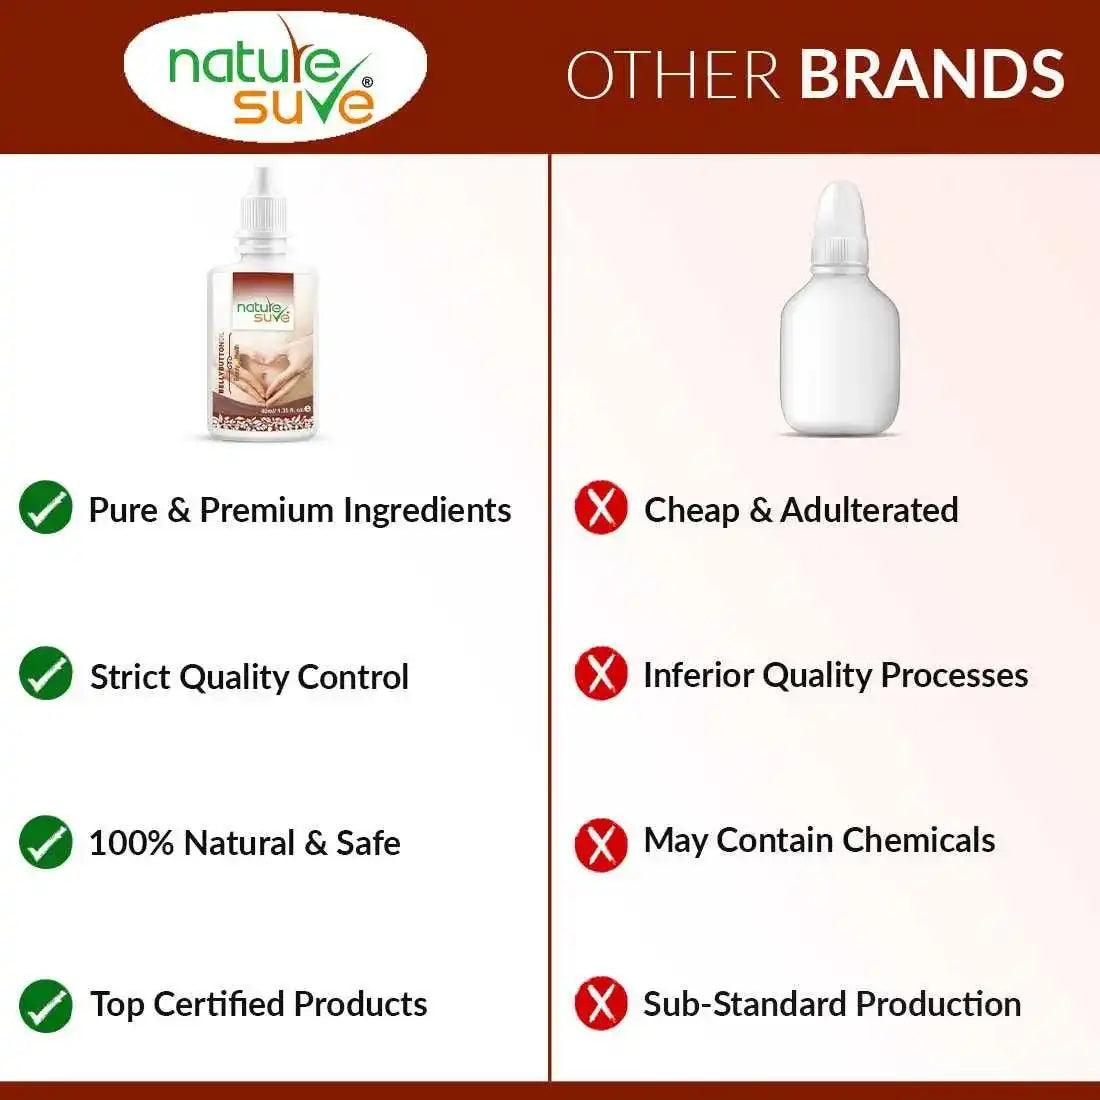 Nature Sure Belly Button Nabhi Oil for Health and Beauty Offers Premium Quality - everteen-neud.com